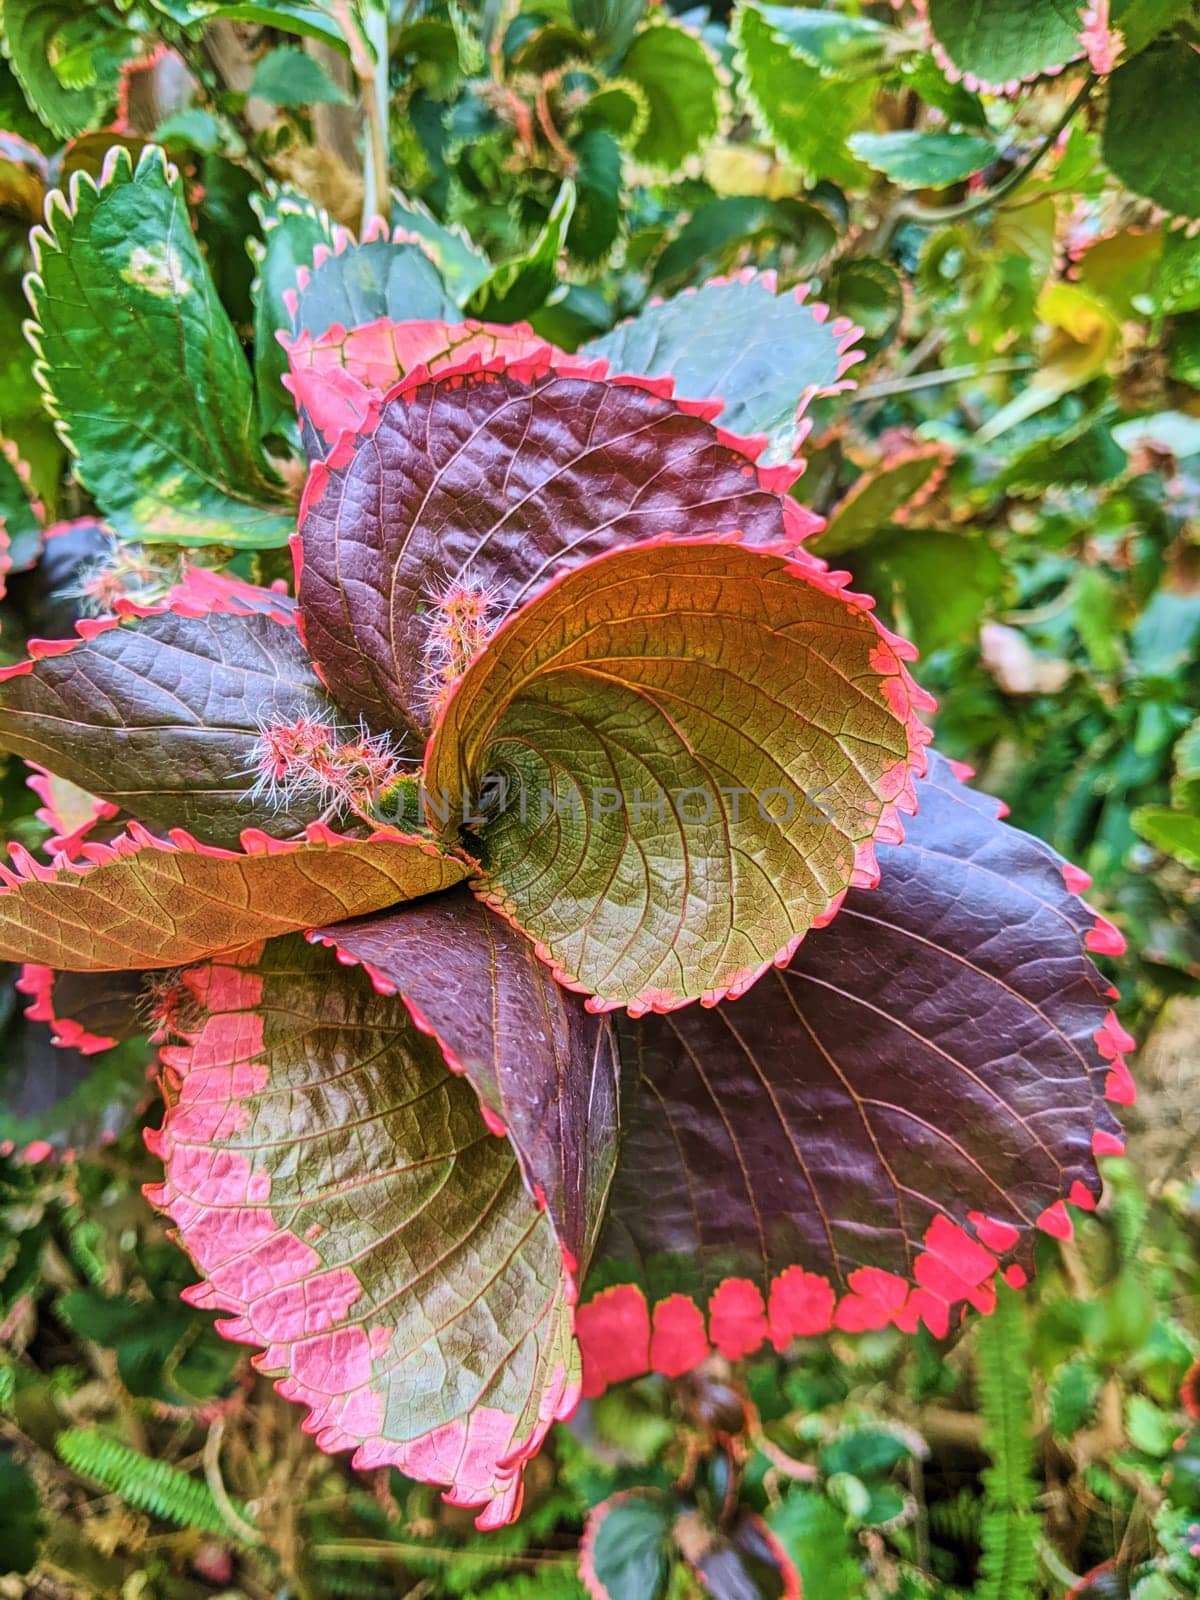 Vibrant Botanical Beauty in Fort Wayne, Indiana - Close-up of a Strikingly Colorful Leaf Amidst Lush Garden Foliage, 2023